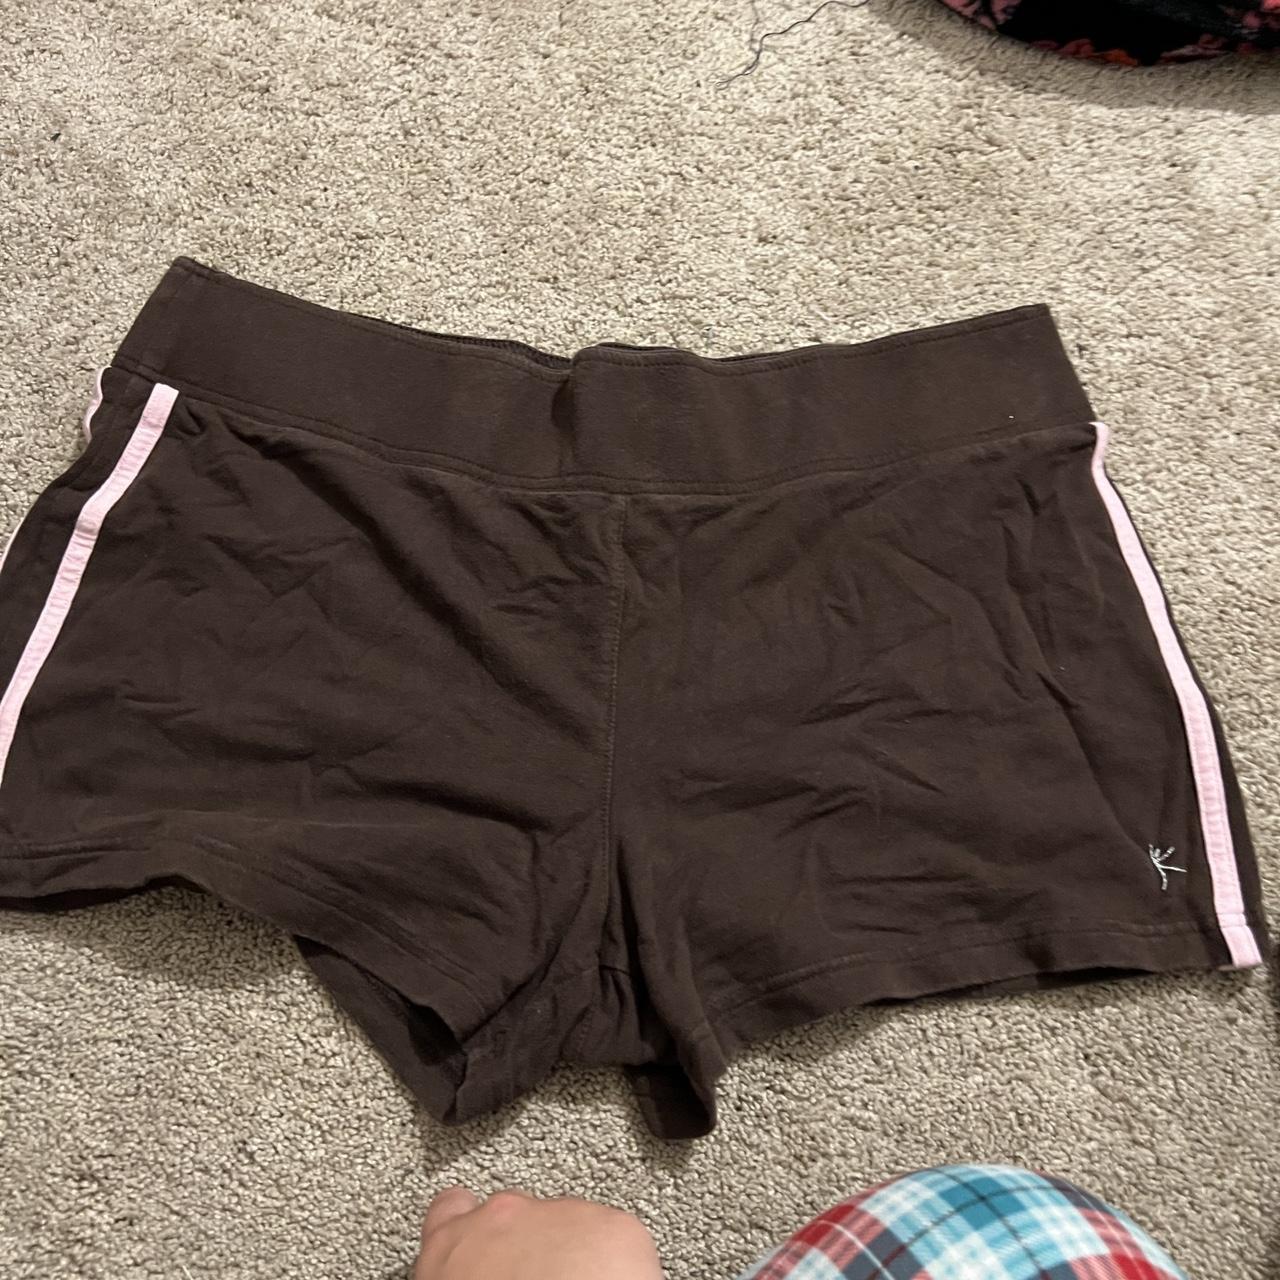 Y2K shorts brown and pink shorts worn a couple... - Depop